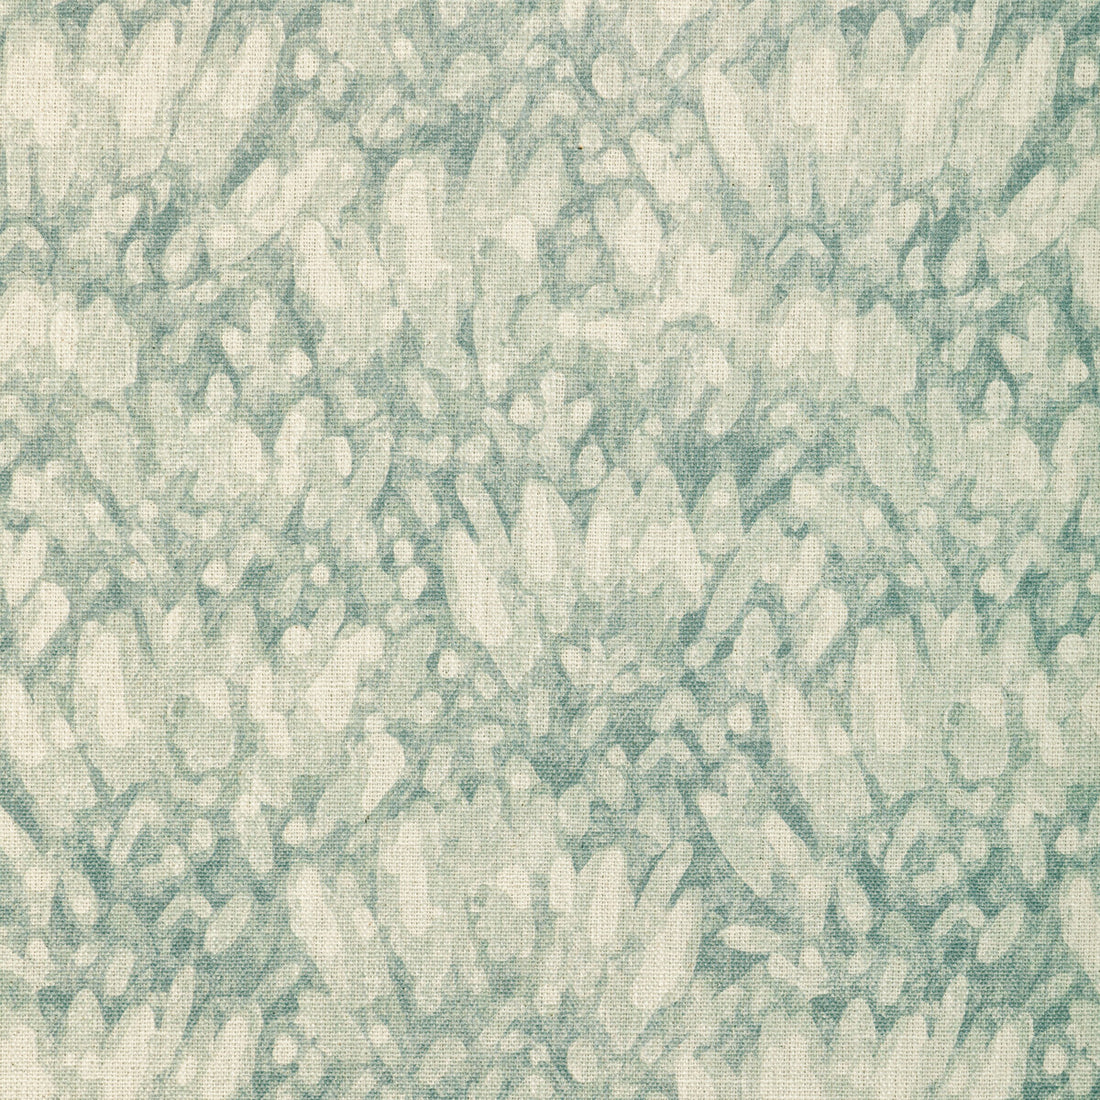 Merida fabric in agave color - pattern MERIDA.31.0 - by Kravet Couture in the Barbara Barry Ojai collection